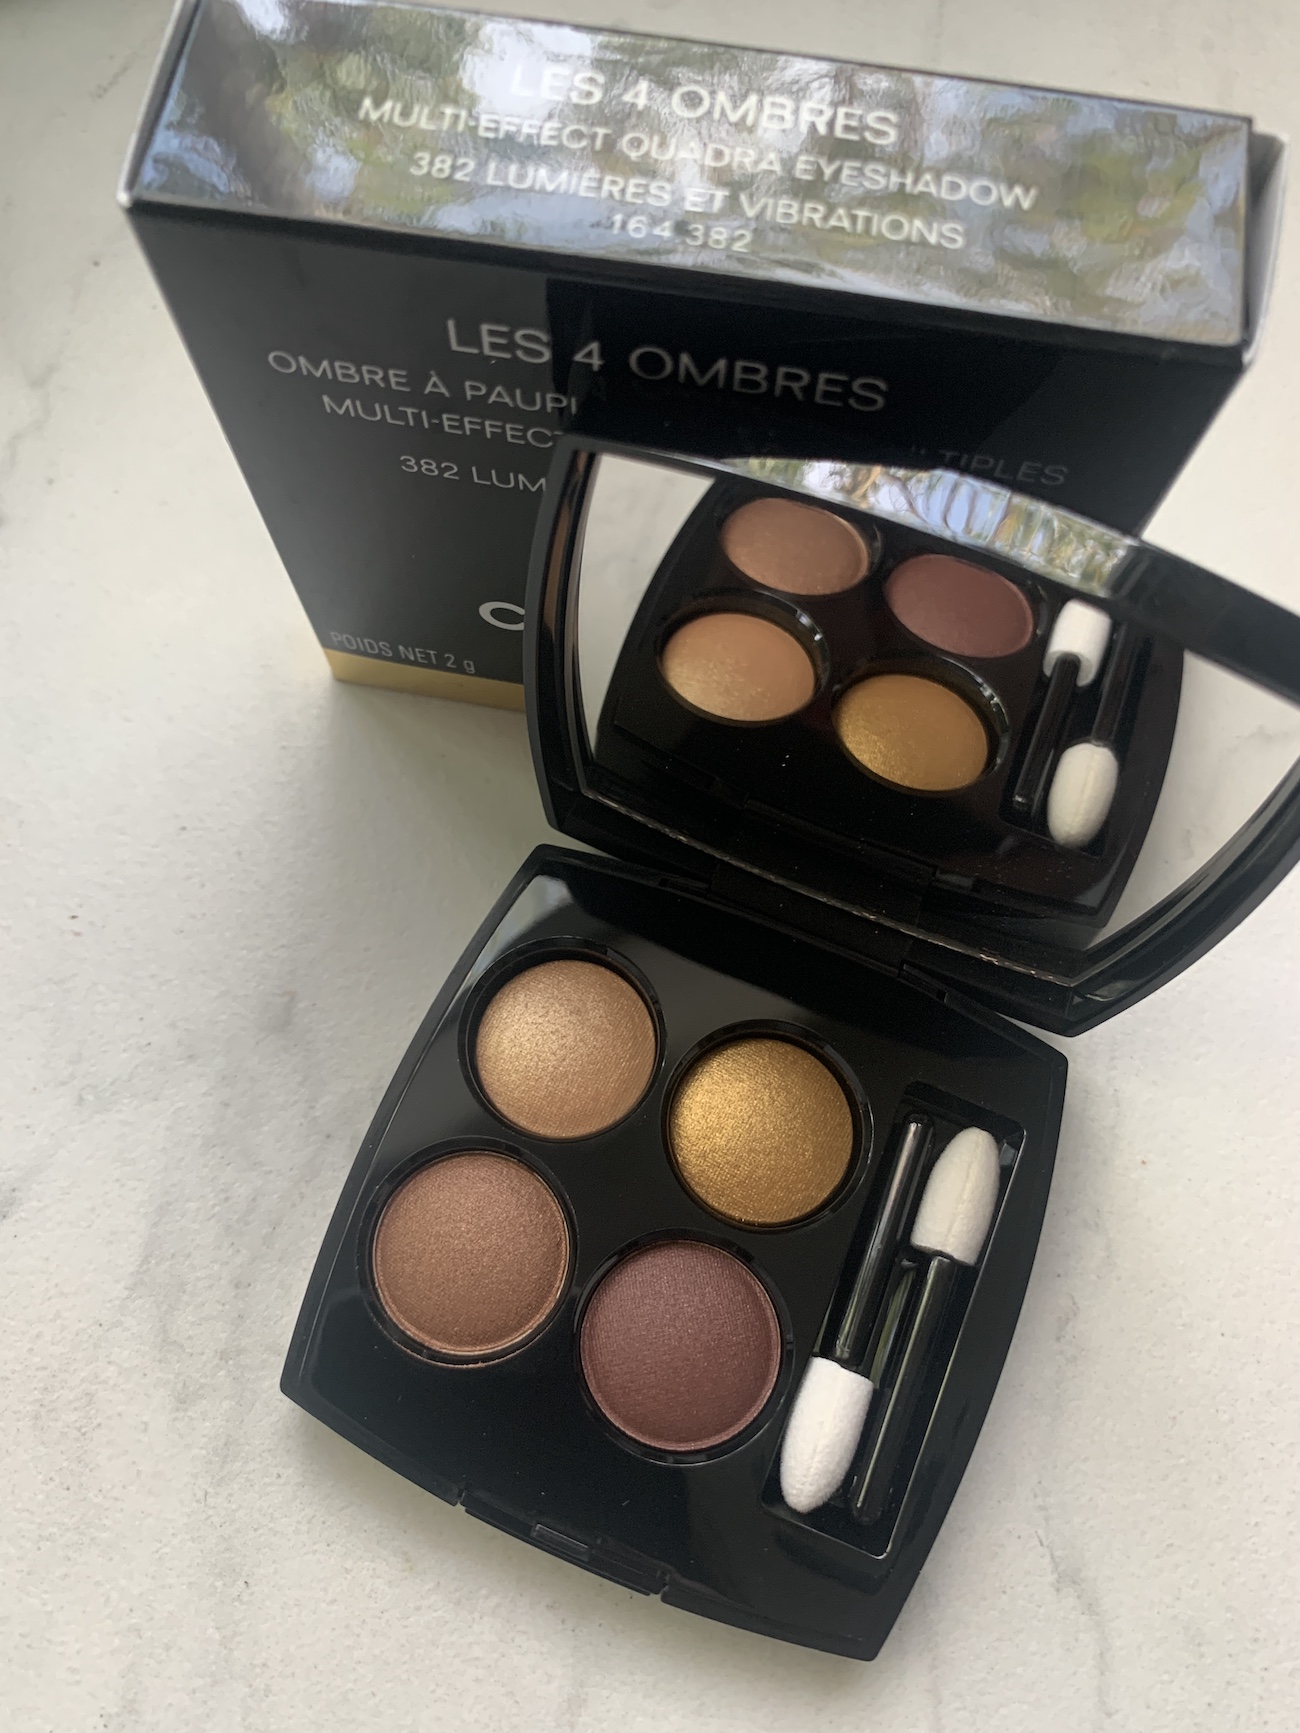 Chanel 382 Lumieres et Vibrations Eyeshadow Review Swatches -